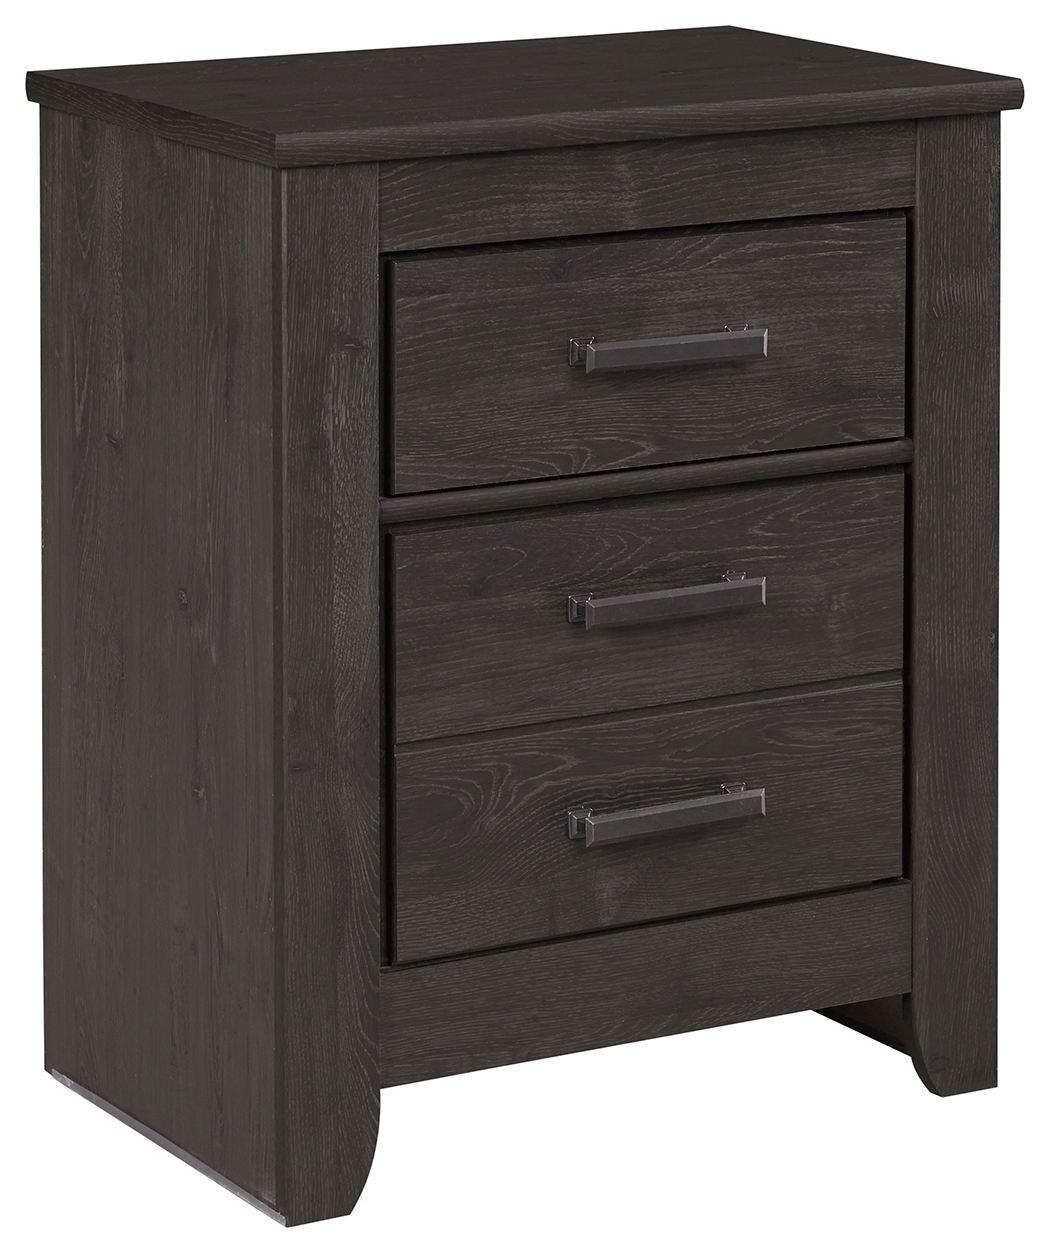 Brinxton - Charcoal - Two Drawer Night Stand Tony's Home Furnishings Furniture. Beds. Dressers. Sofas.